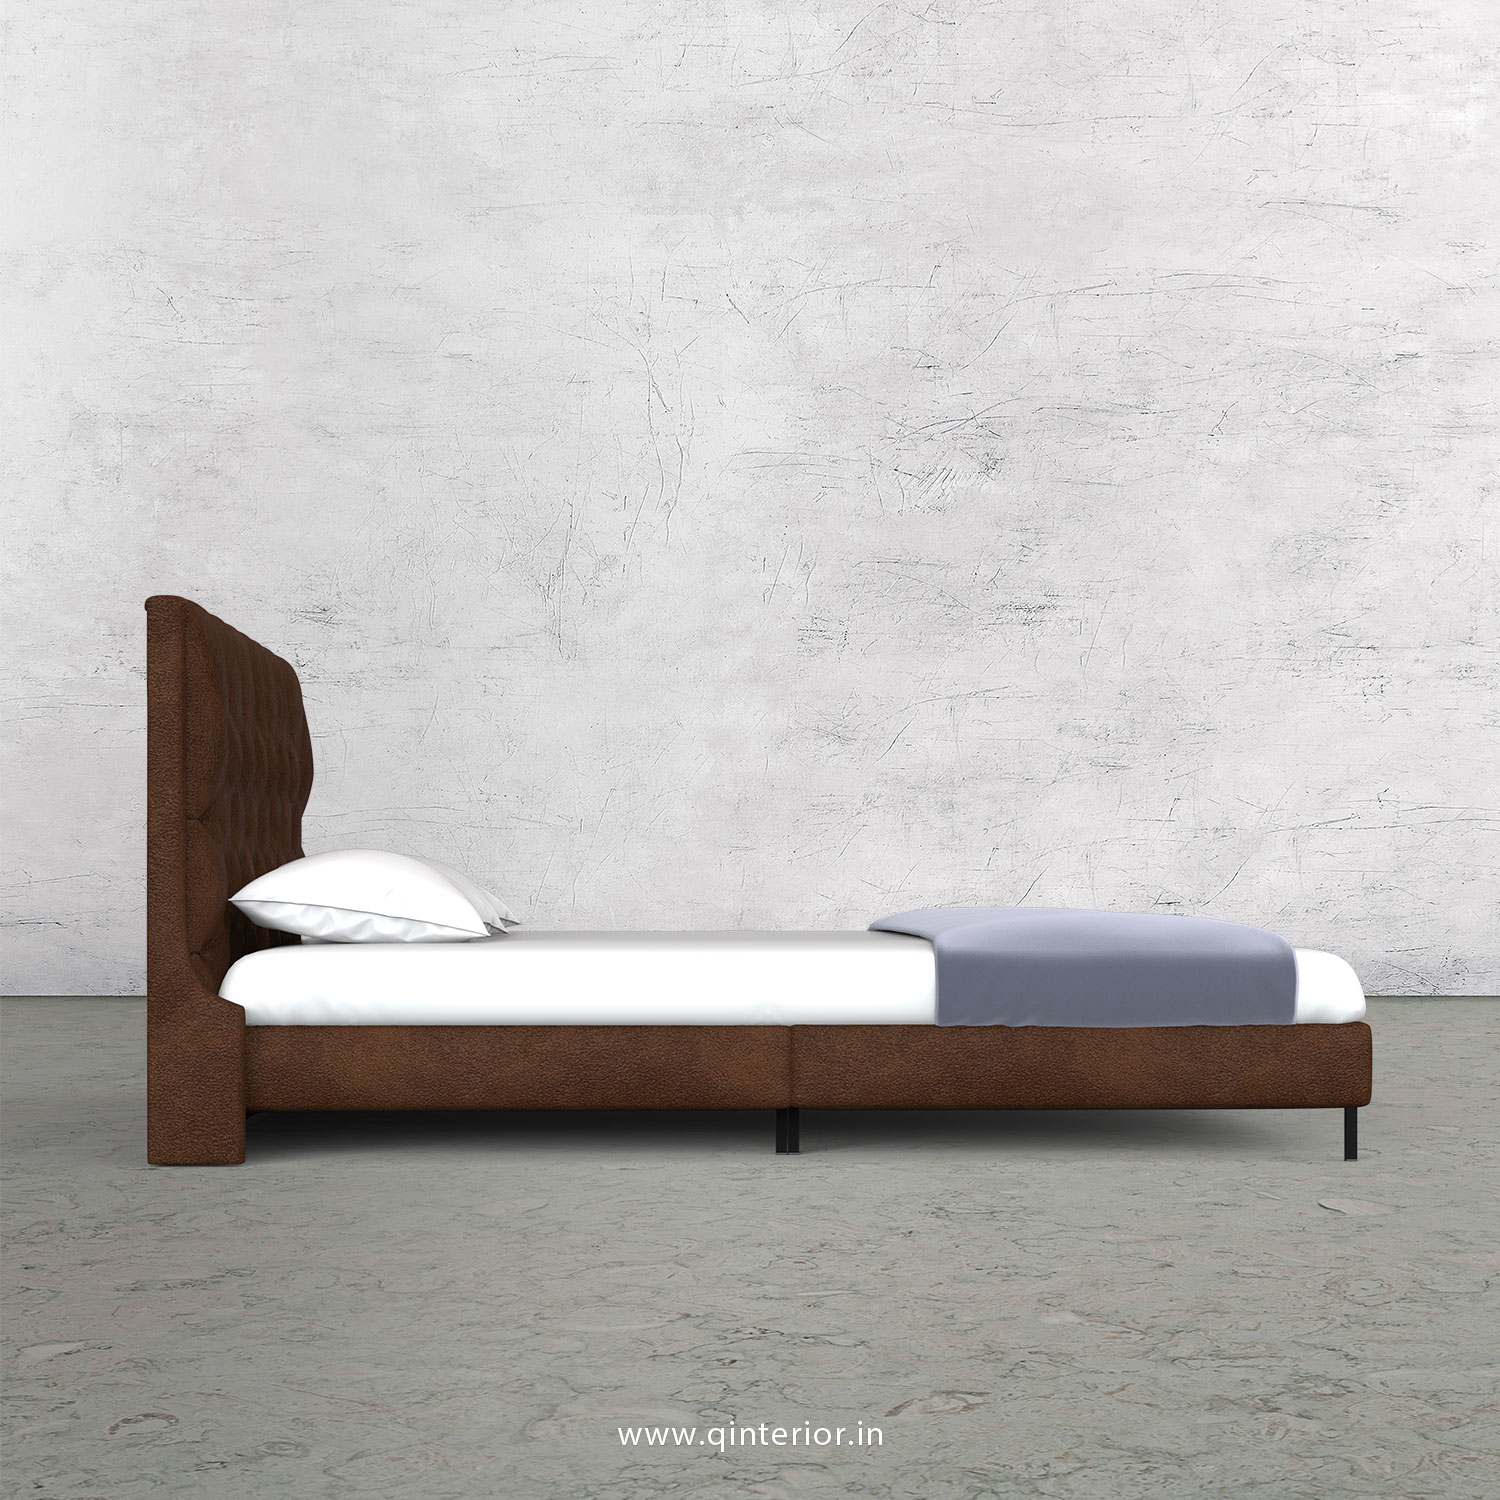 Scorpius King Size Bed in Fab Leather Fabric - KBD003 FL09